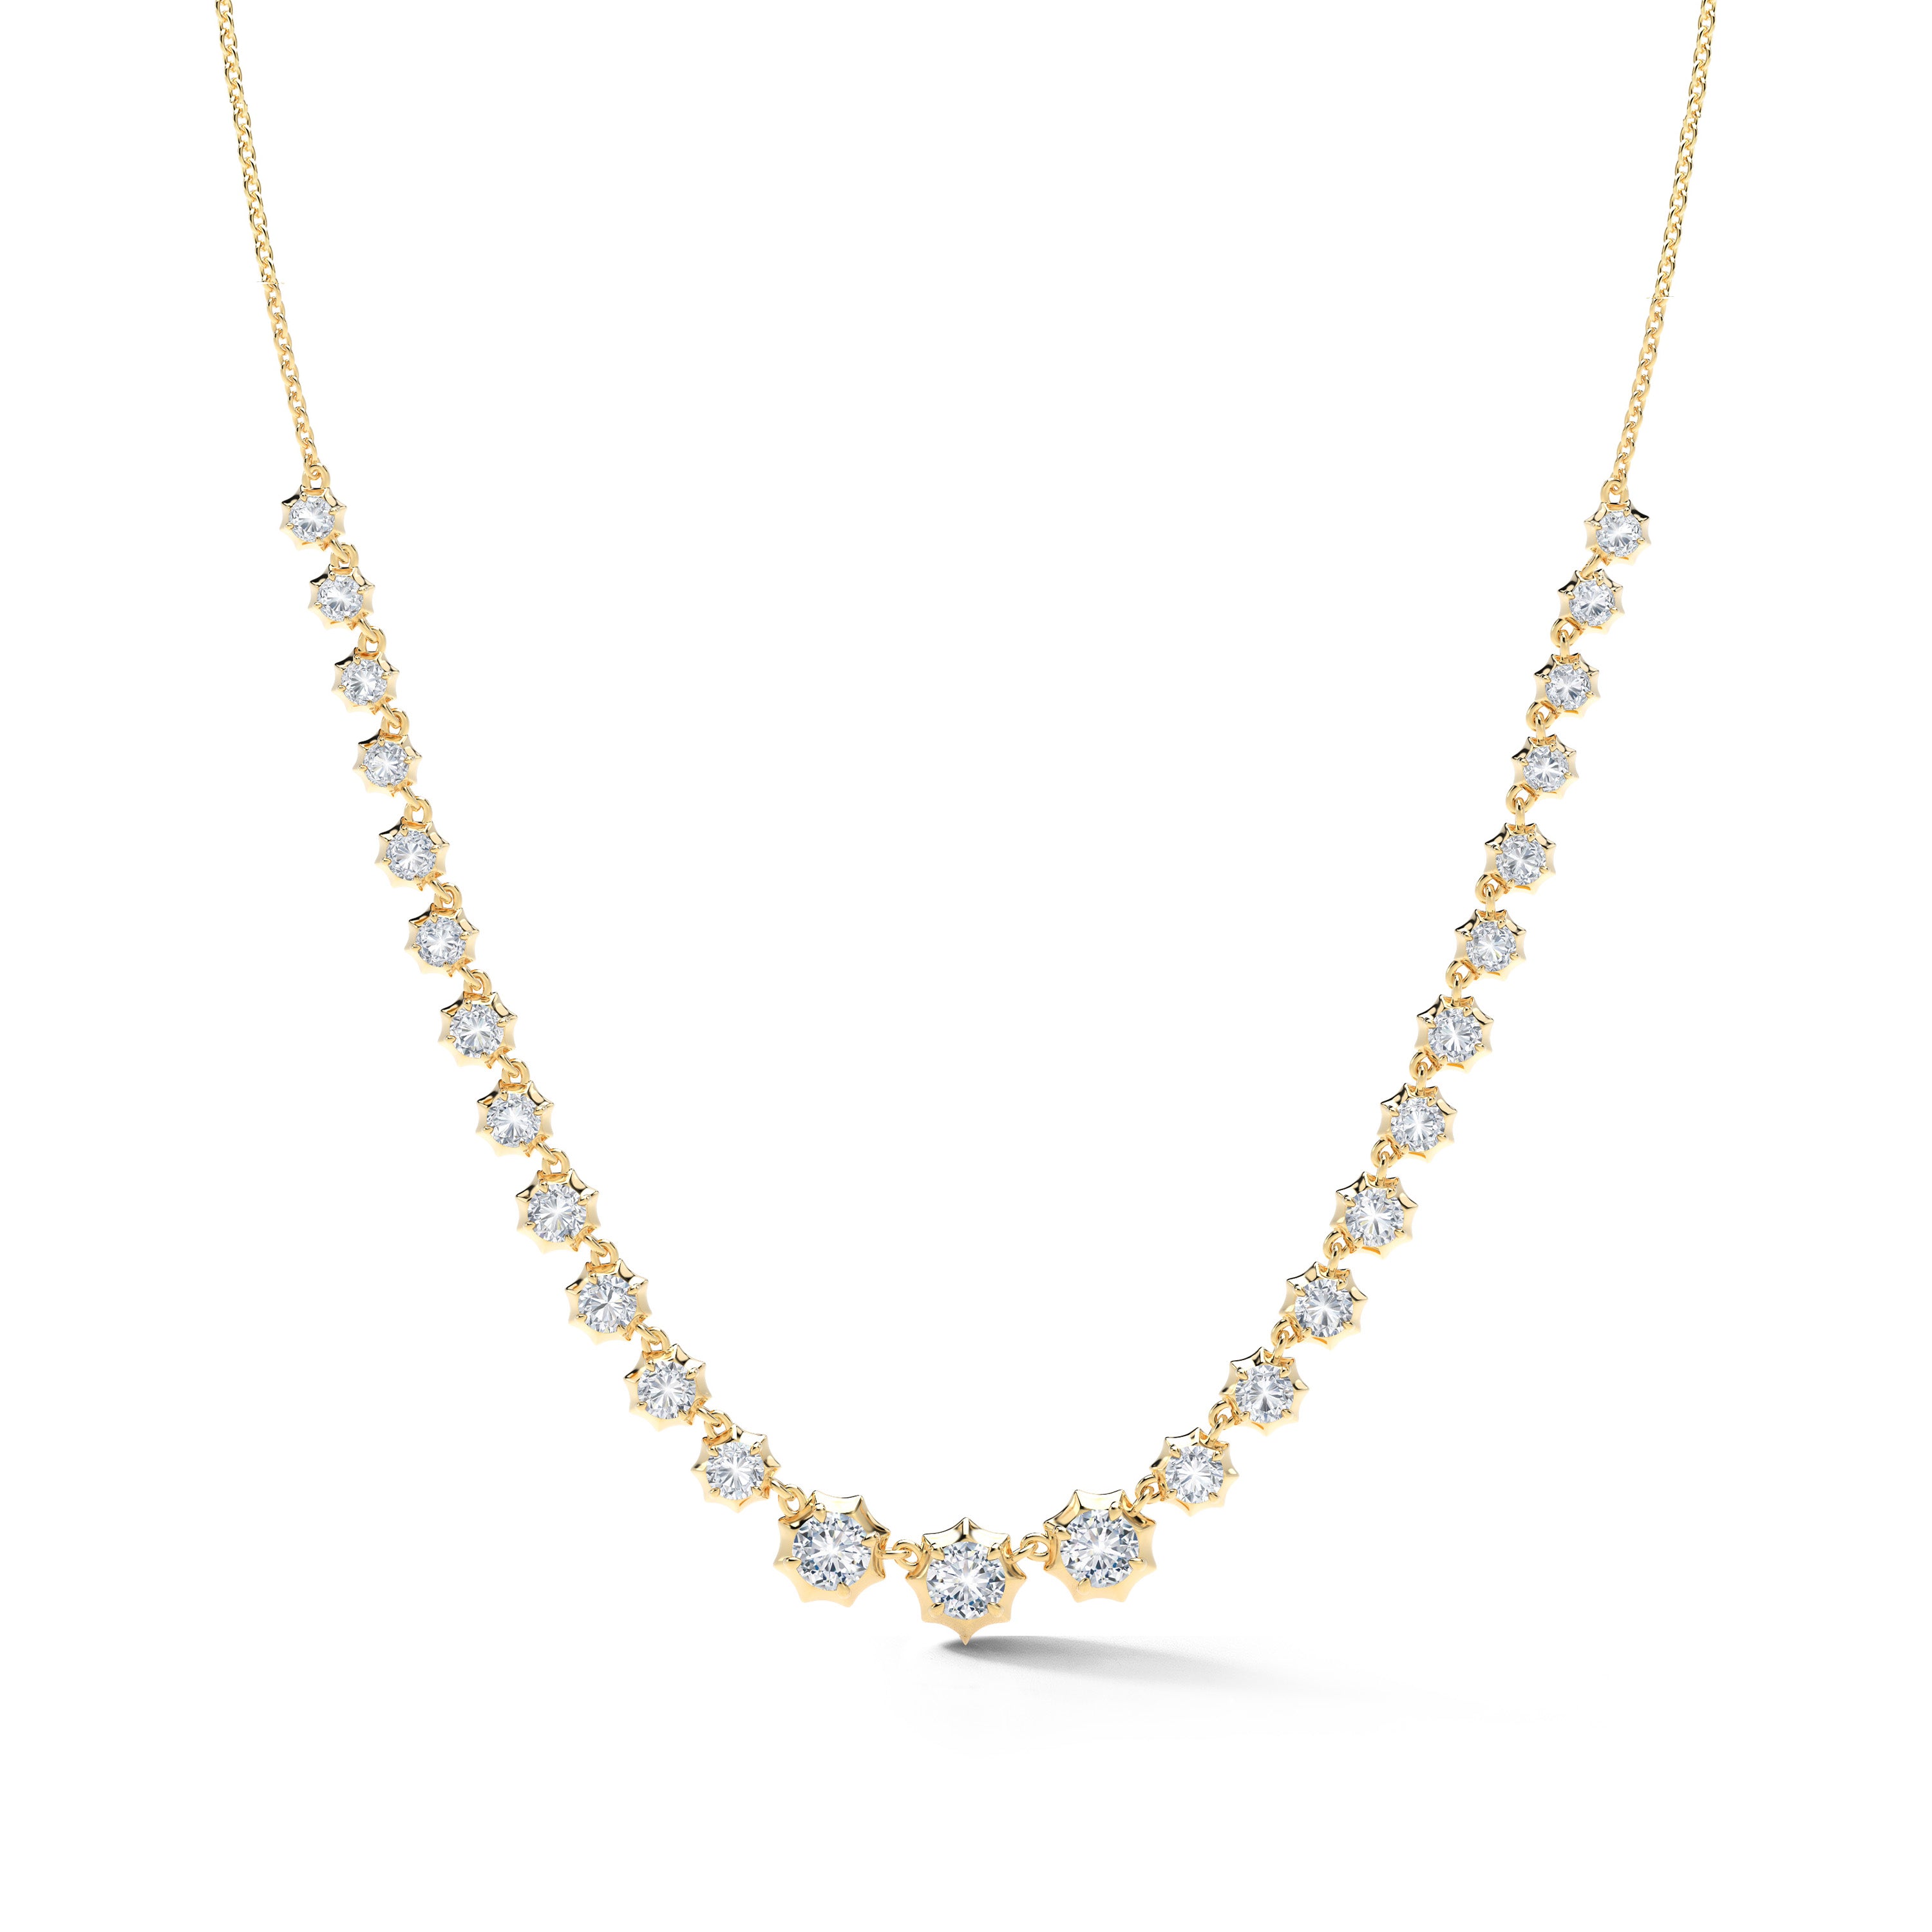 Sophisticate Riviera Necklace